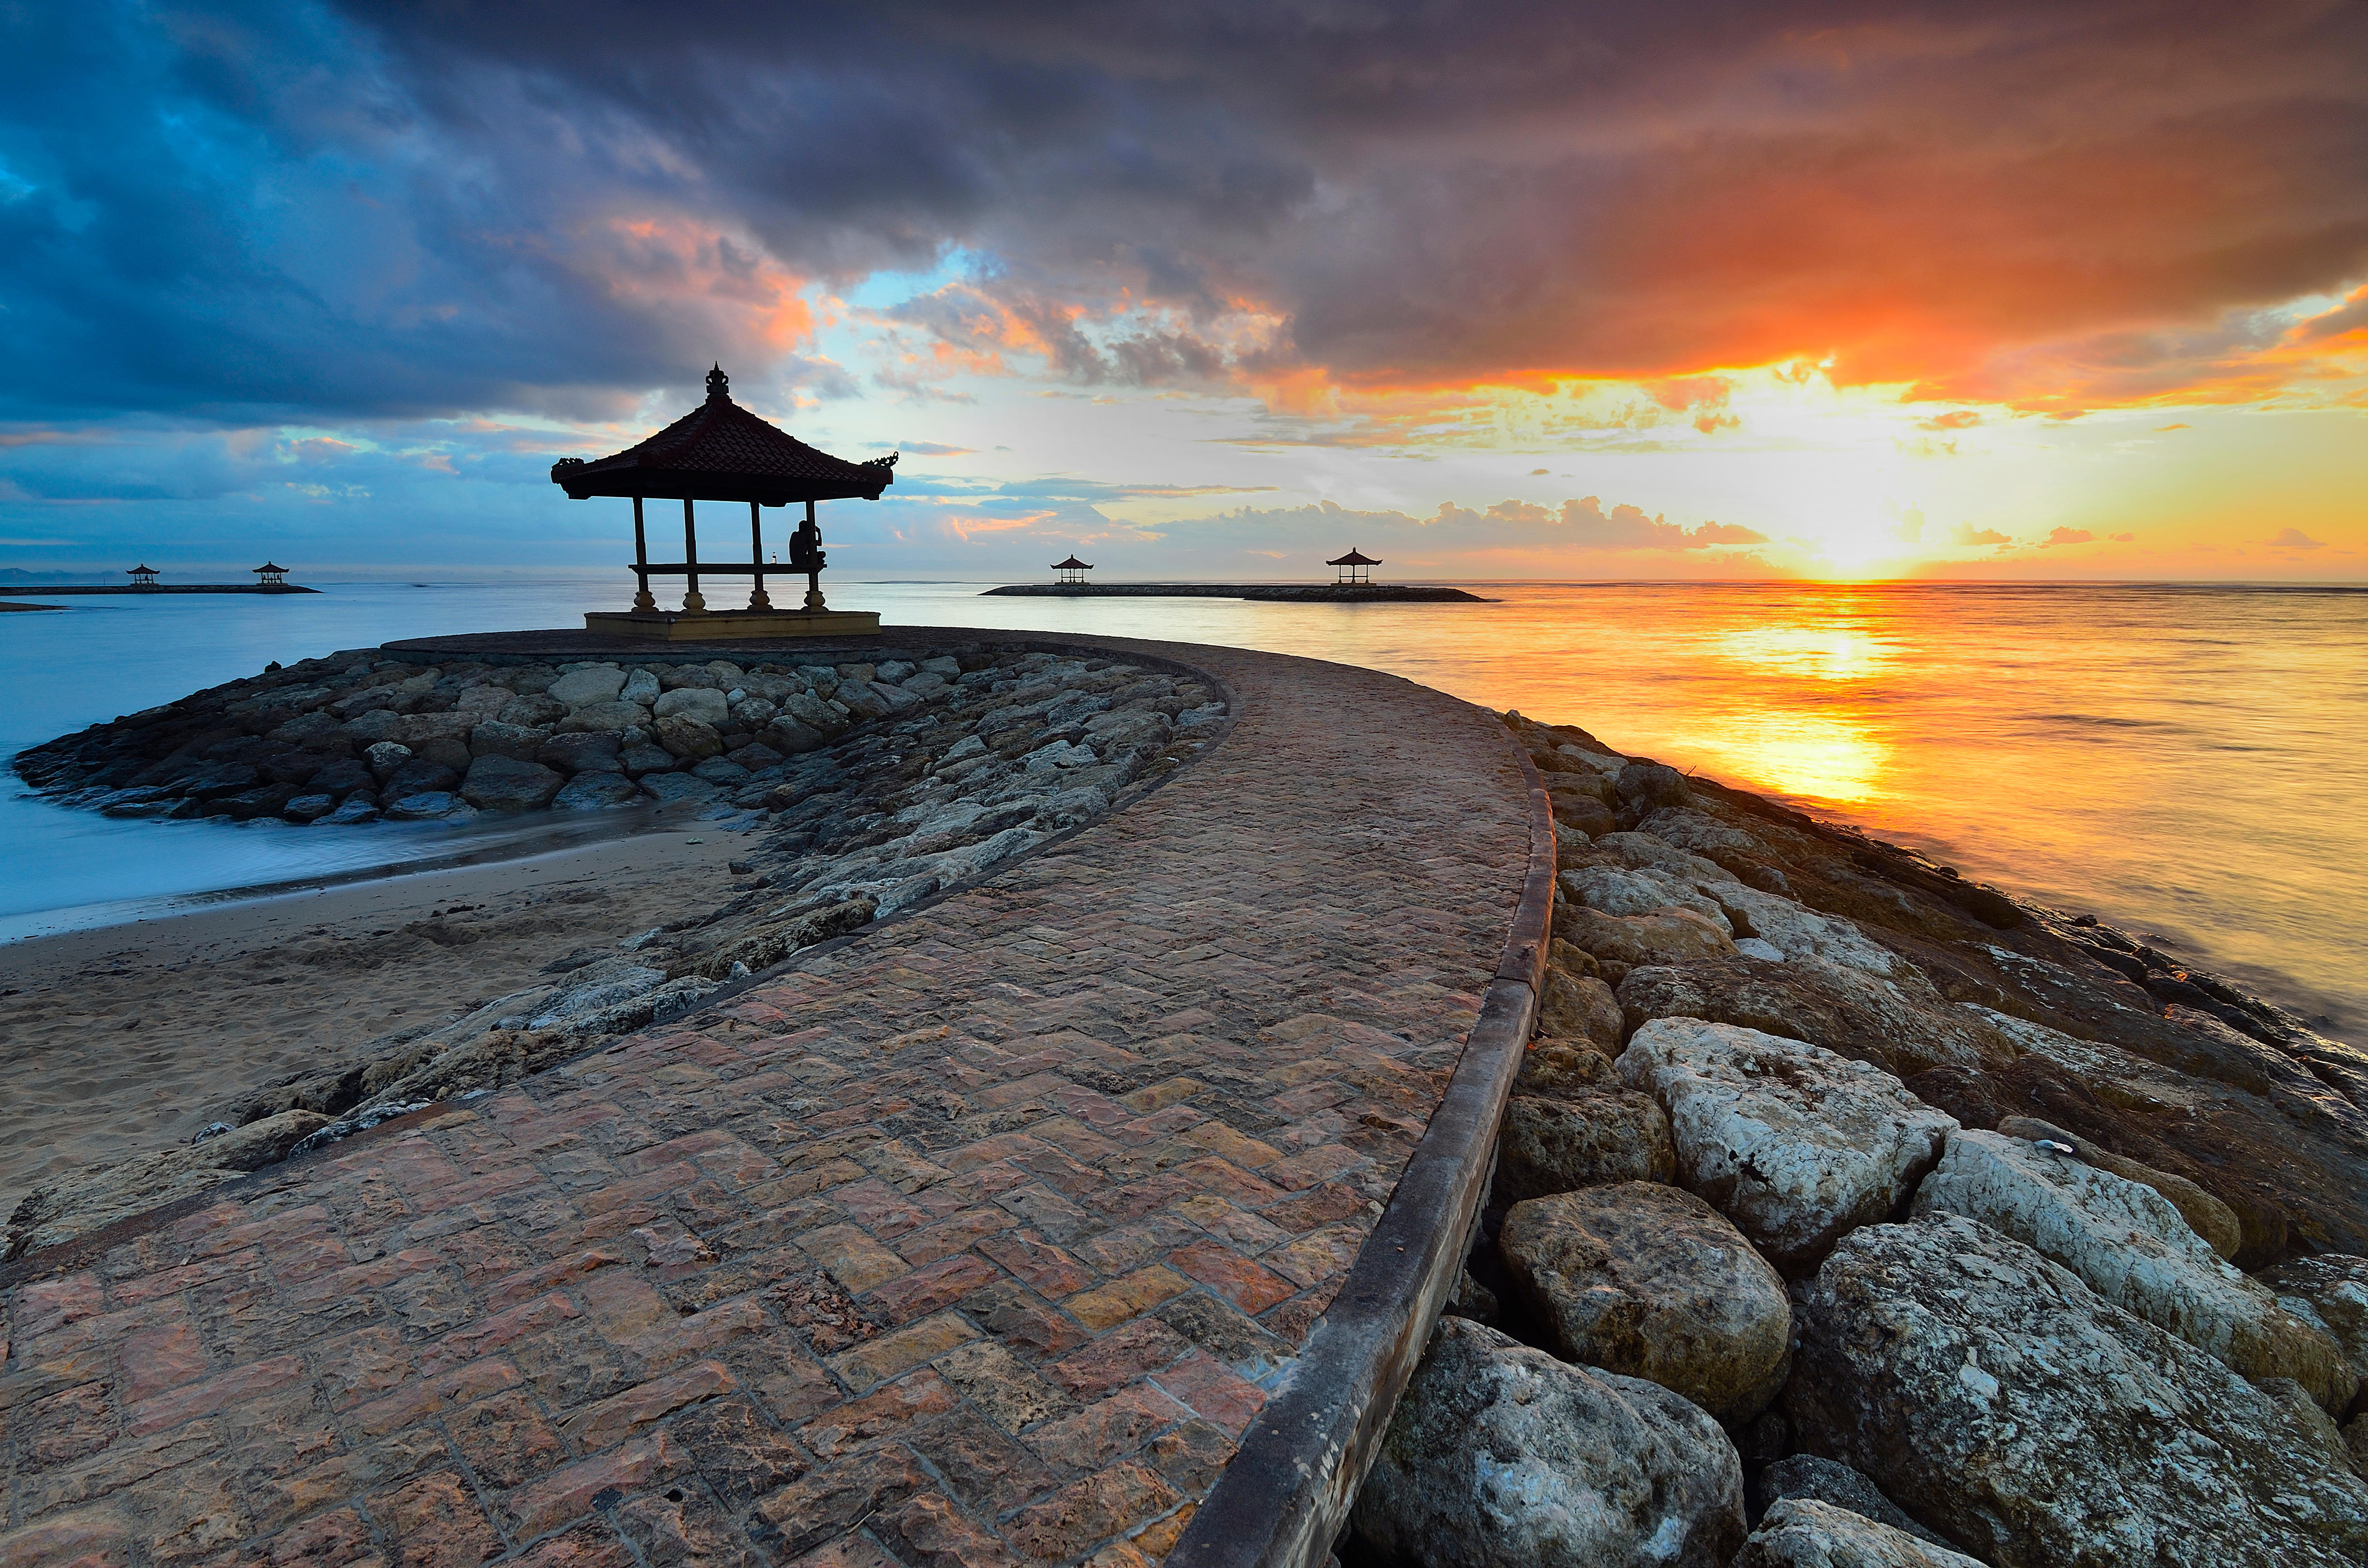 Sanur - One of the Top Attractions in Bali, Indonesia - Yatra.com